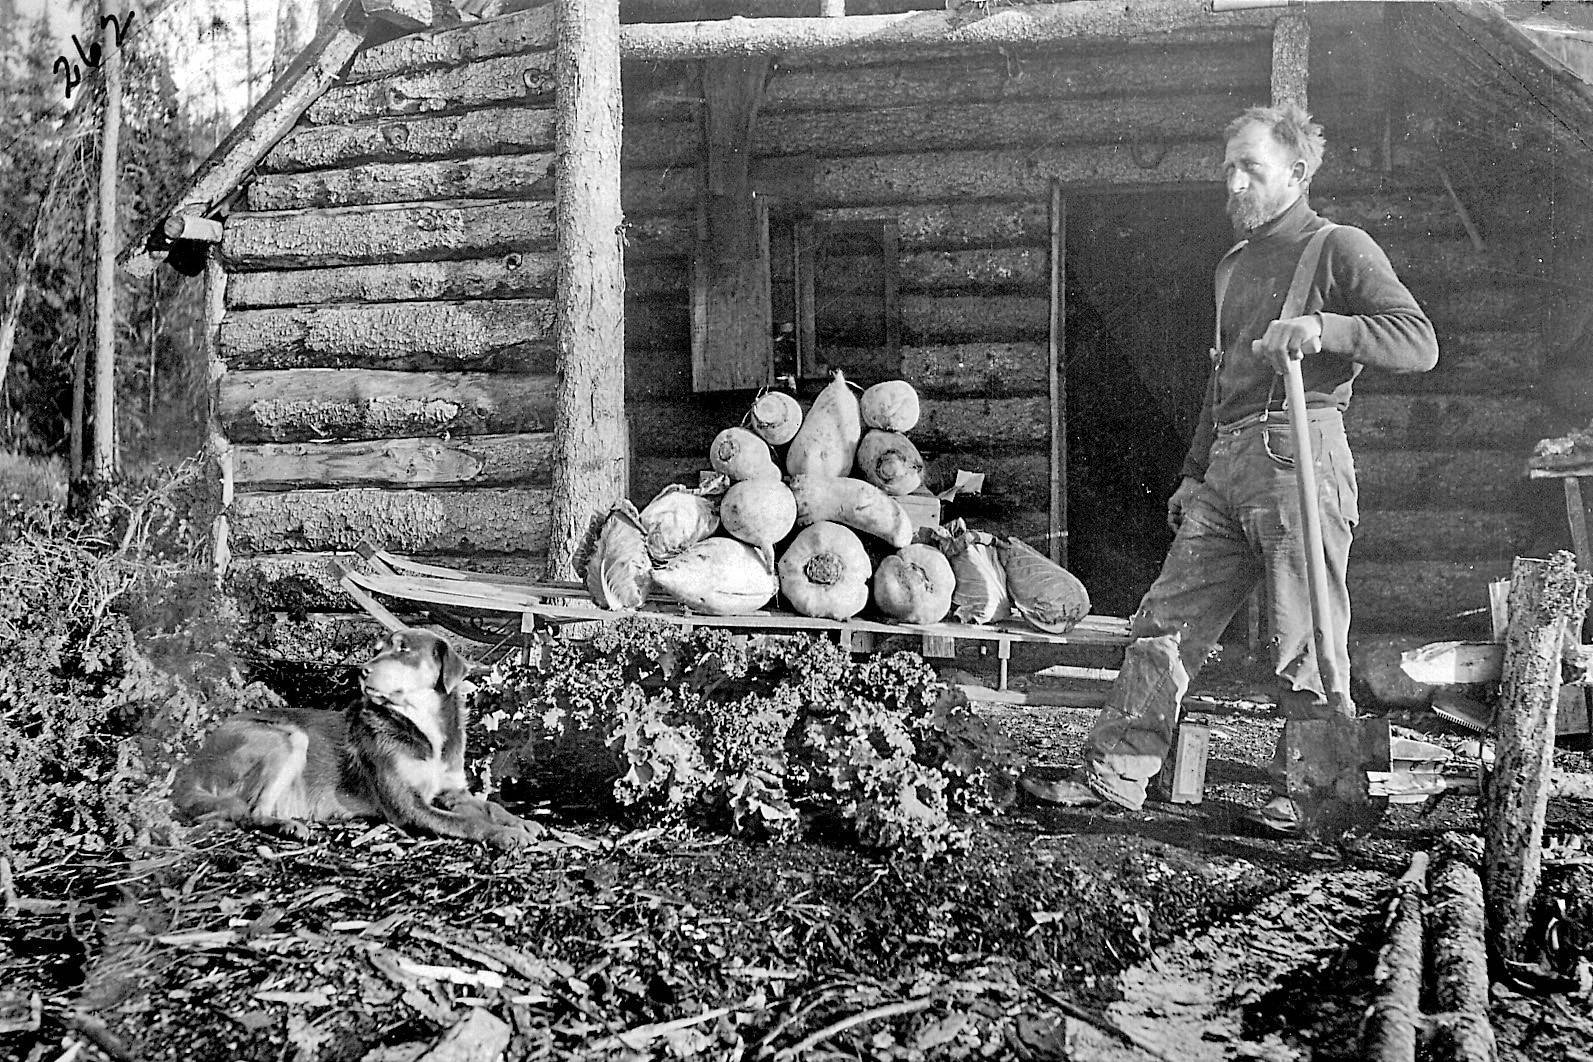 U.S. Forest Service photo
Herman Stelter, one of the few members of the Kings County Mining Company to remain in or return to Alaska, poses here with a big crop of vegetables by his home near the Kenai River canyon circa 1910s.